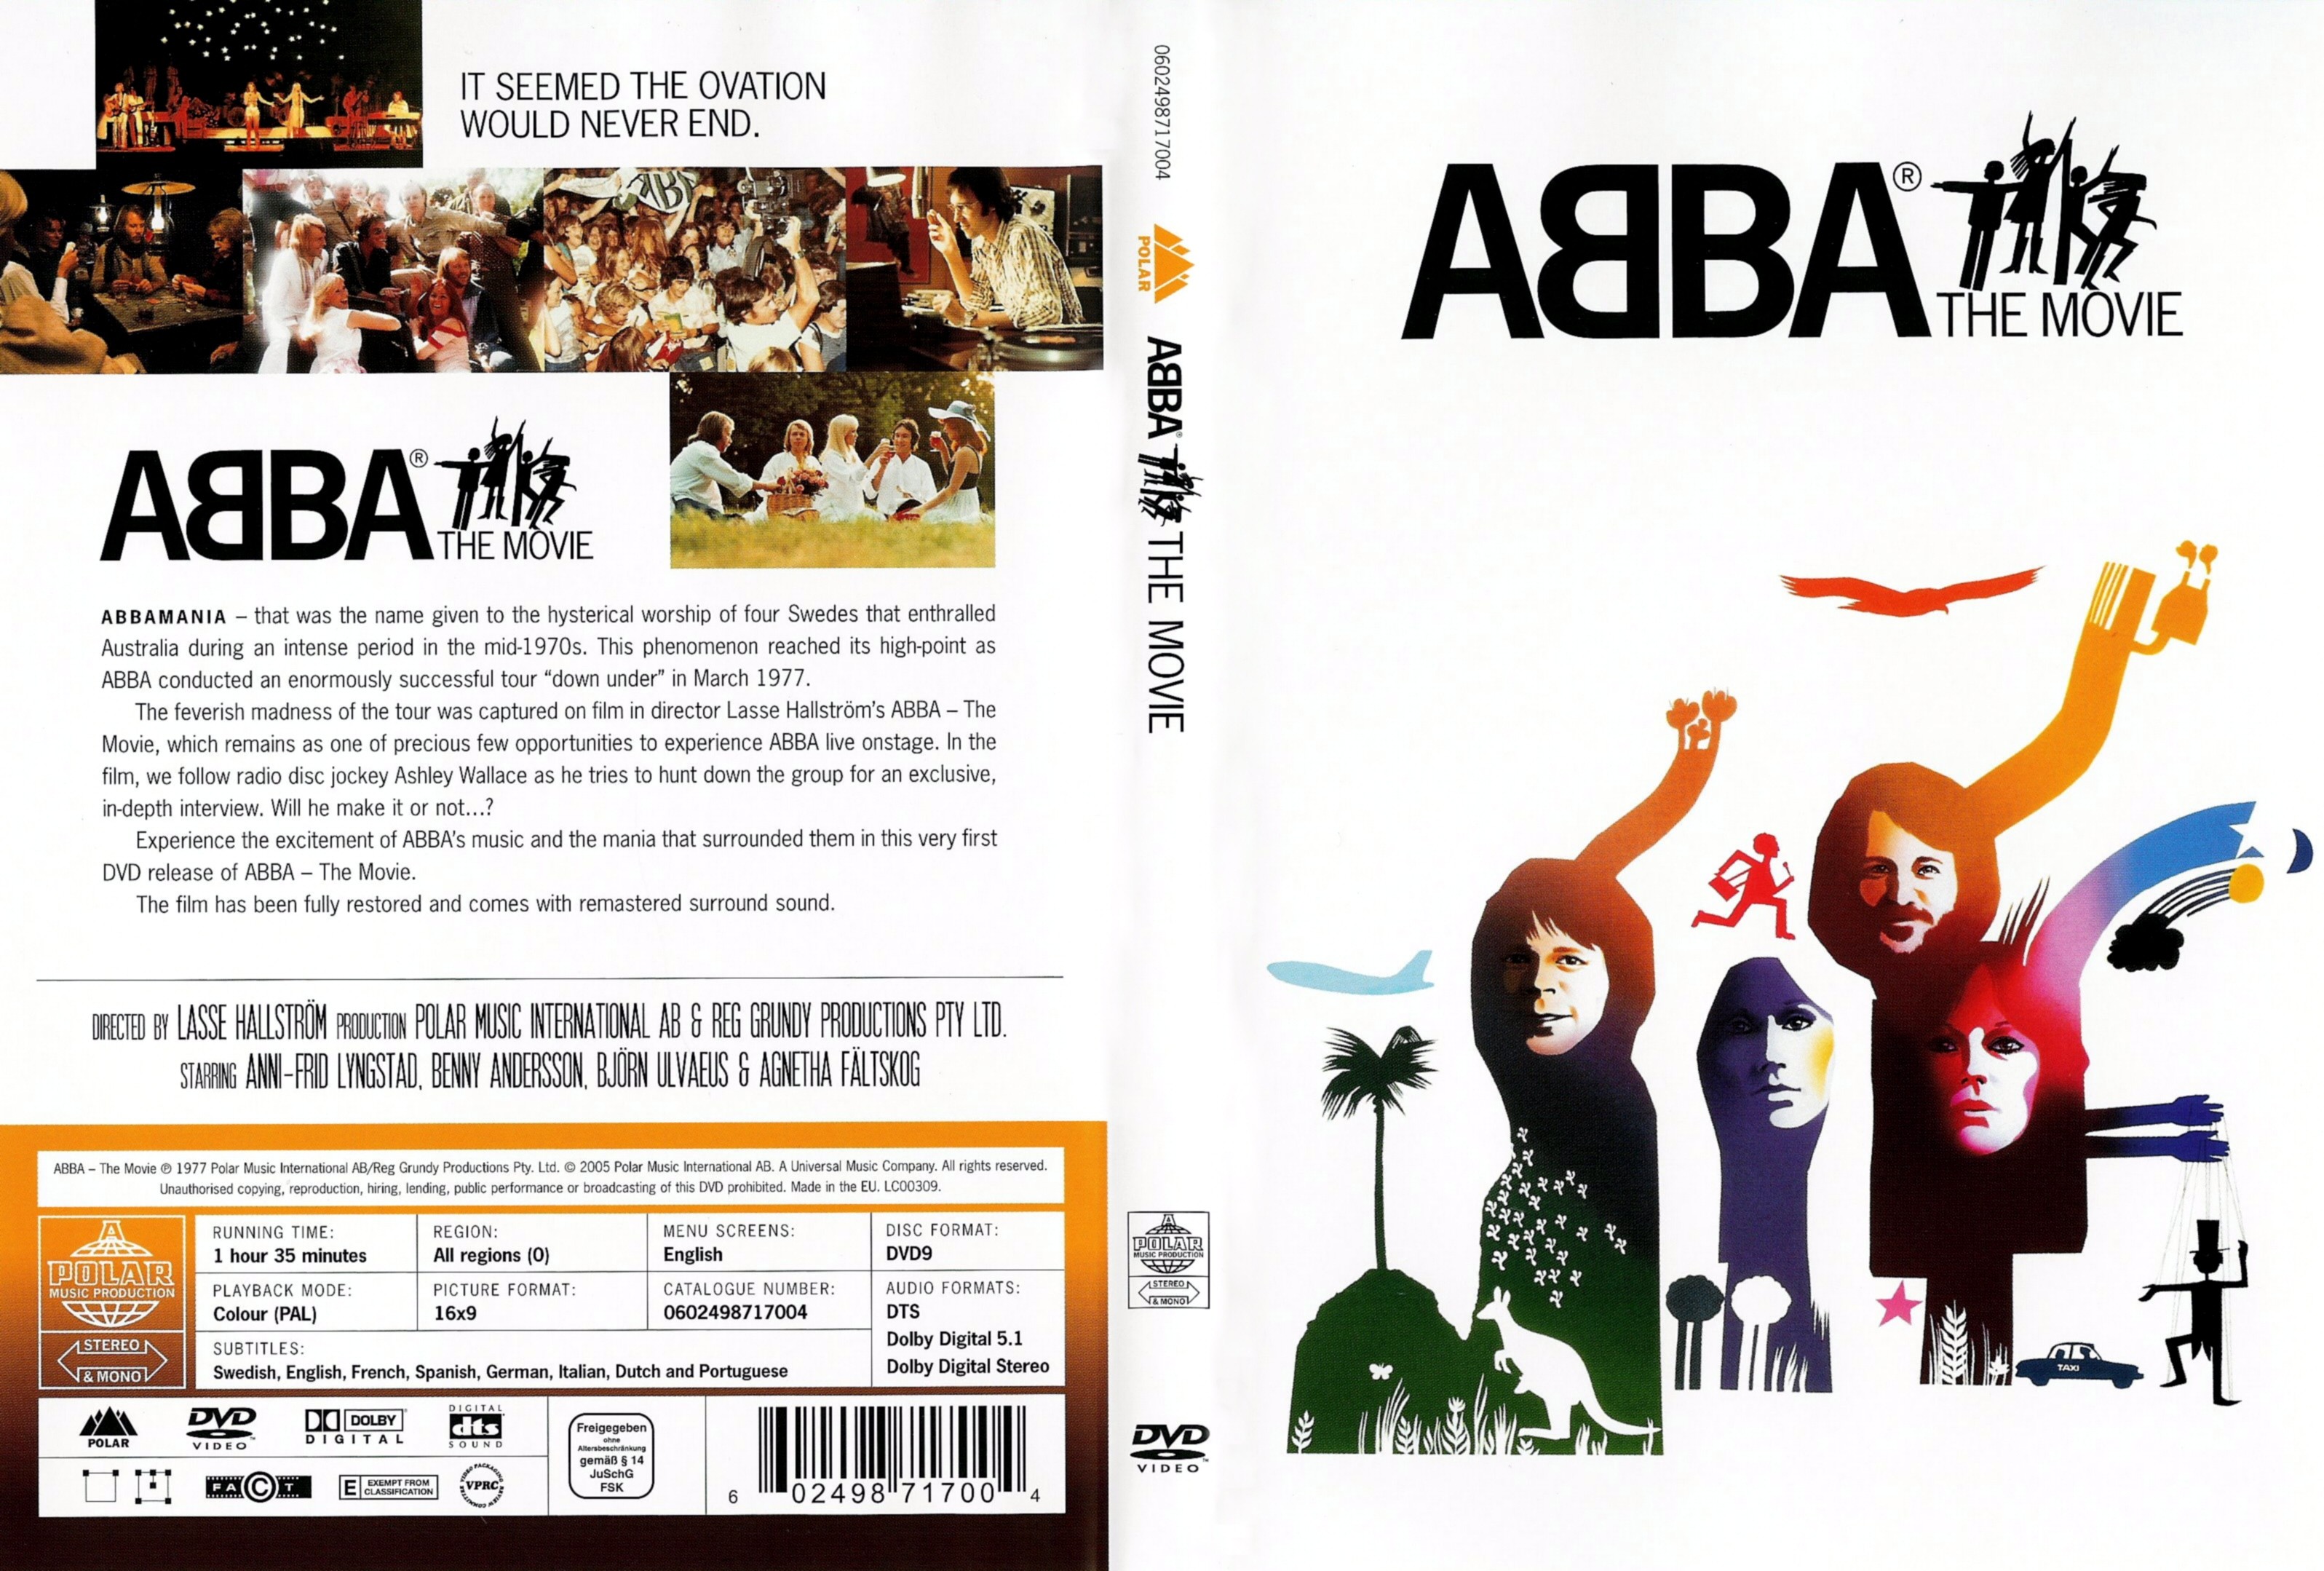 Jaquette DVD ABBA The movie